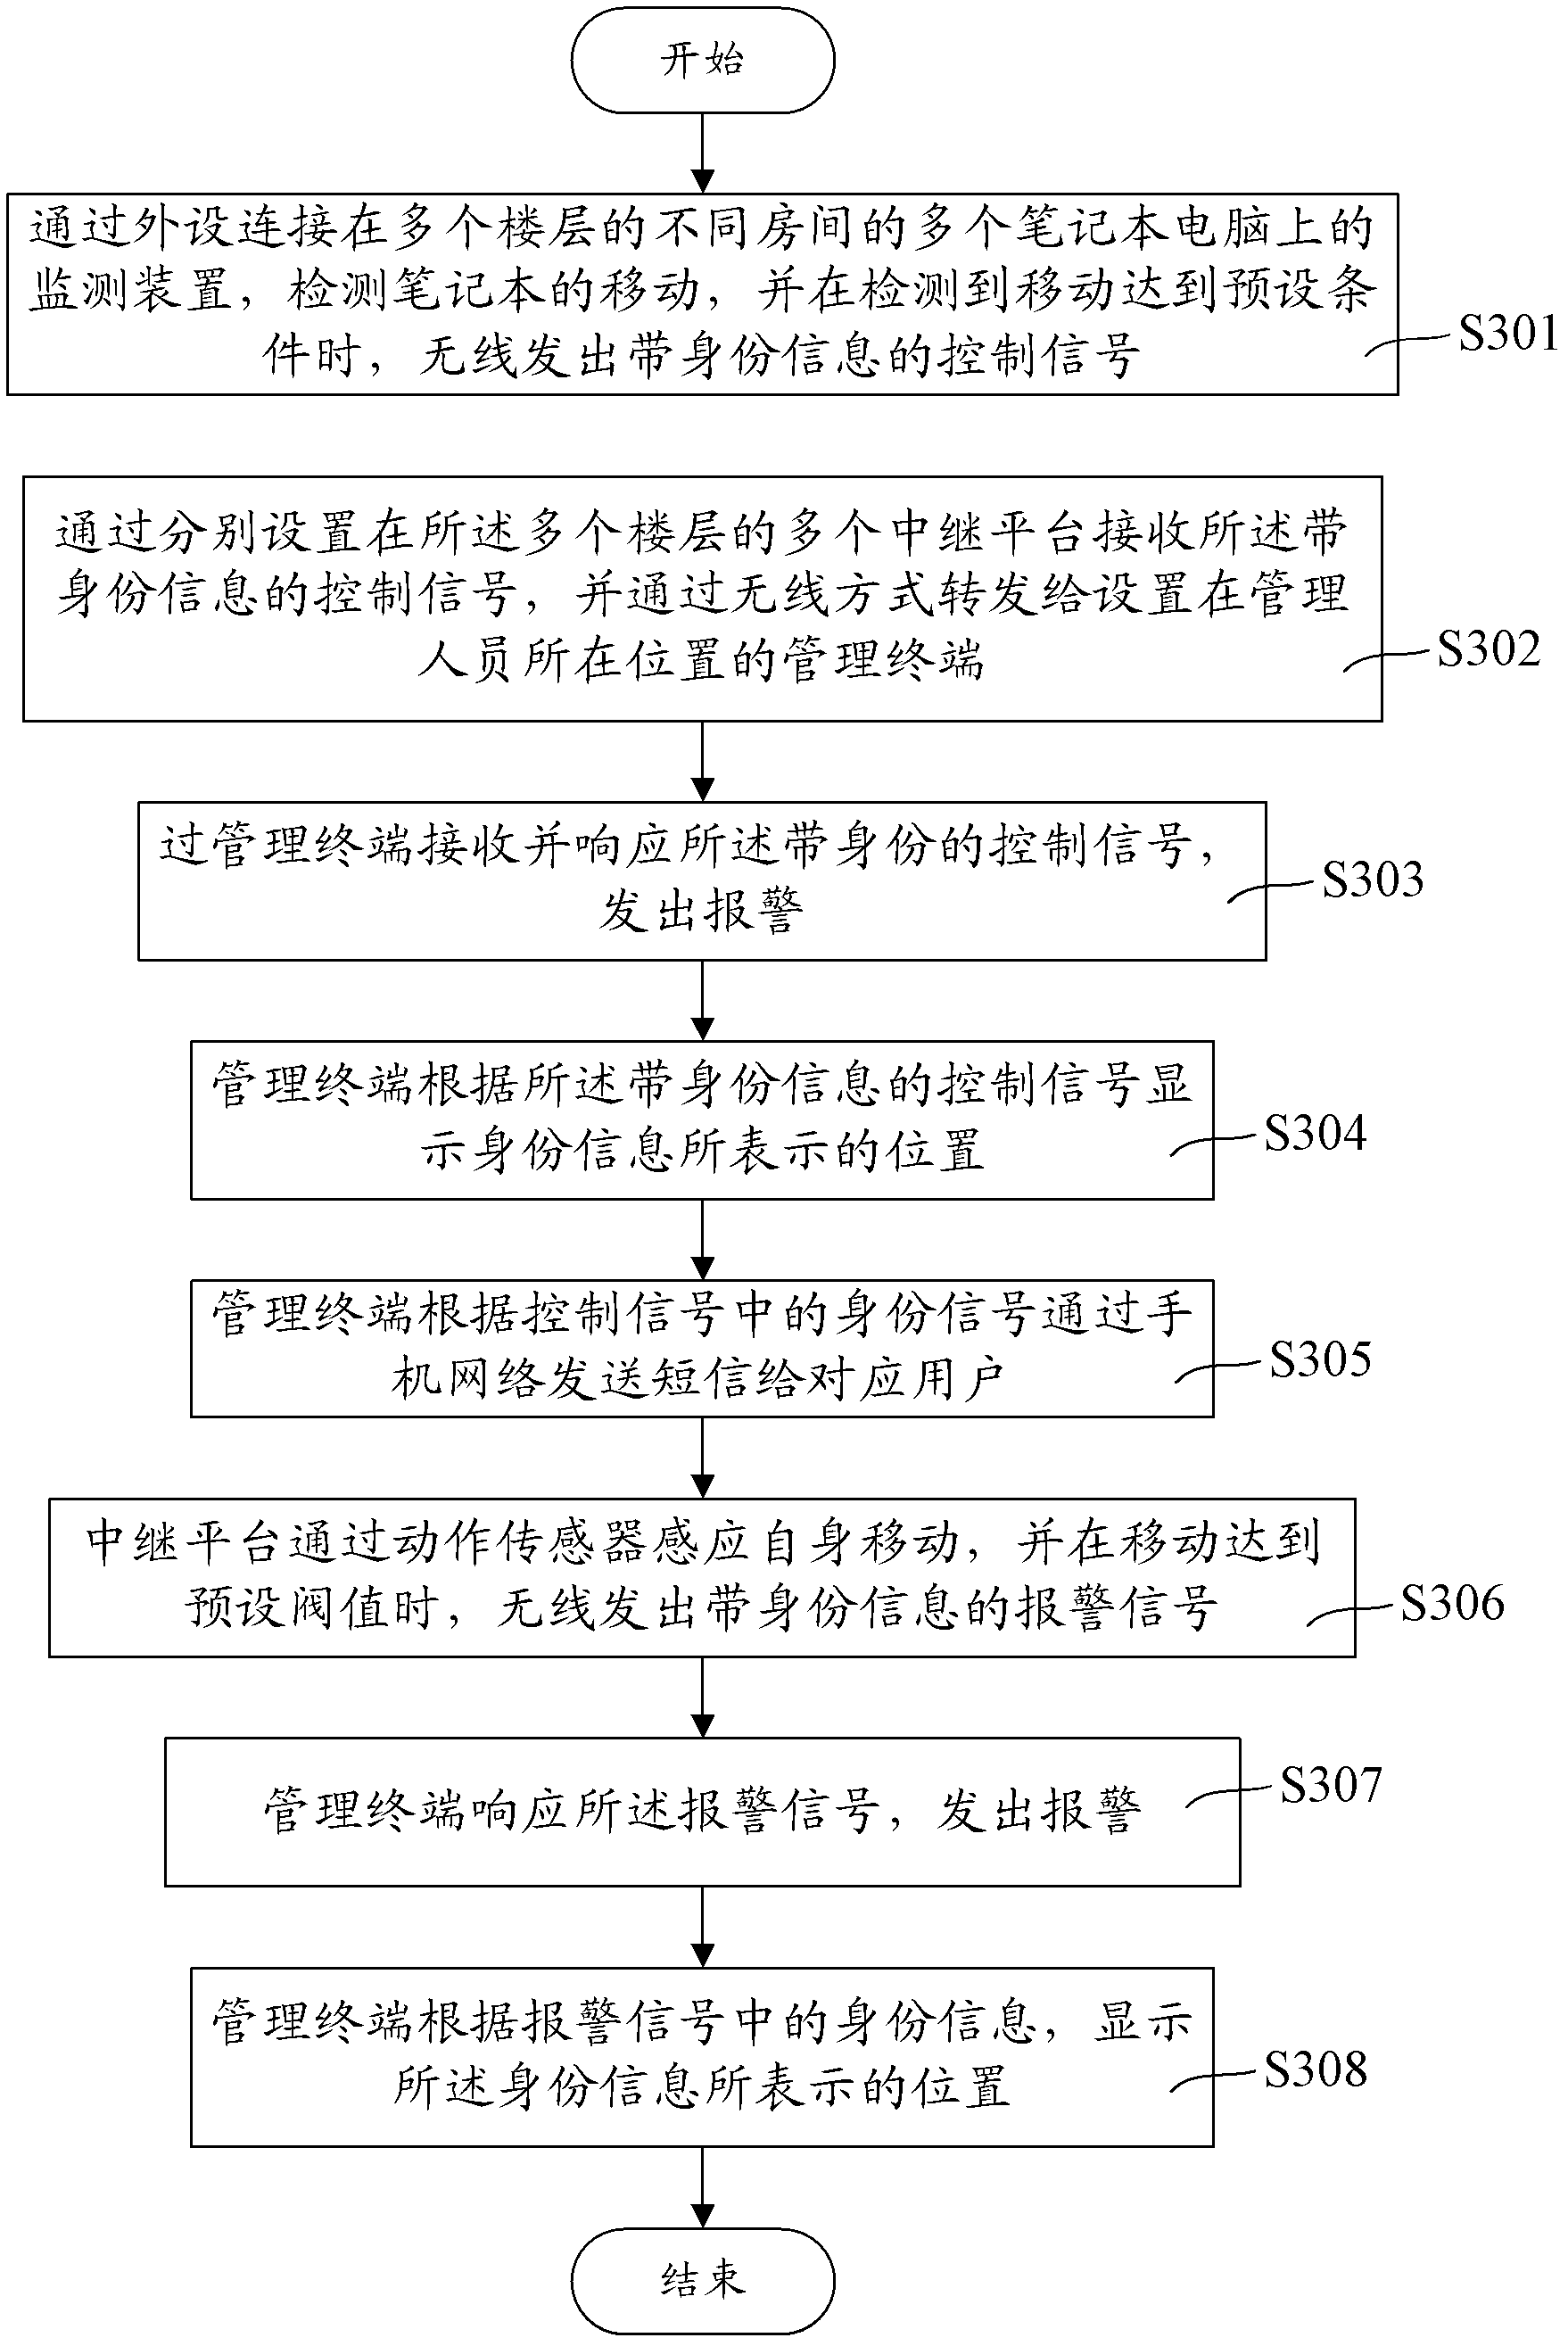 Anti-theft alarm system and method of notebook computer